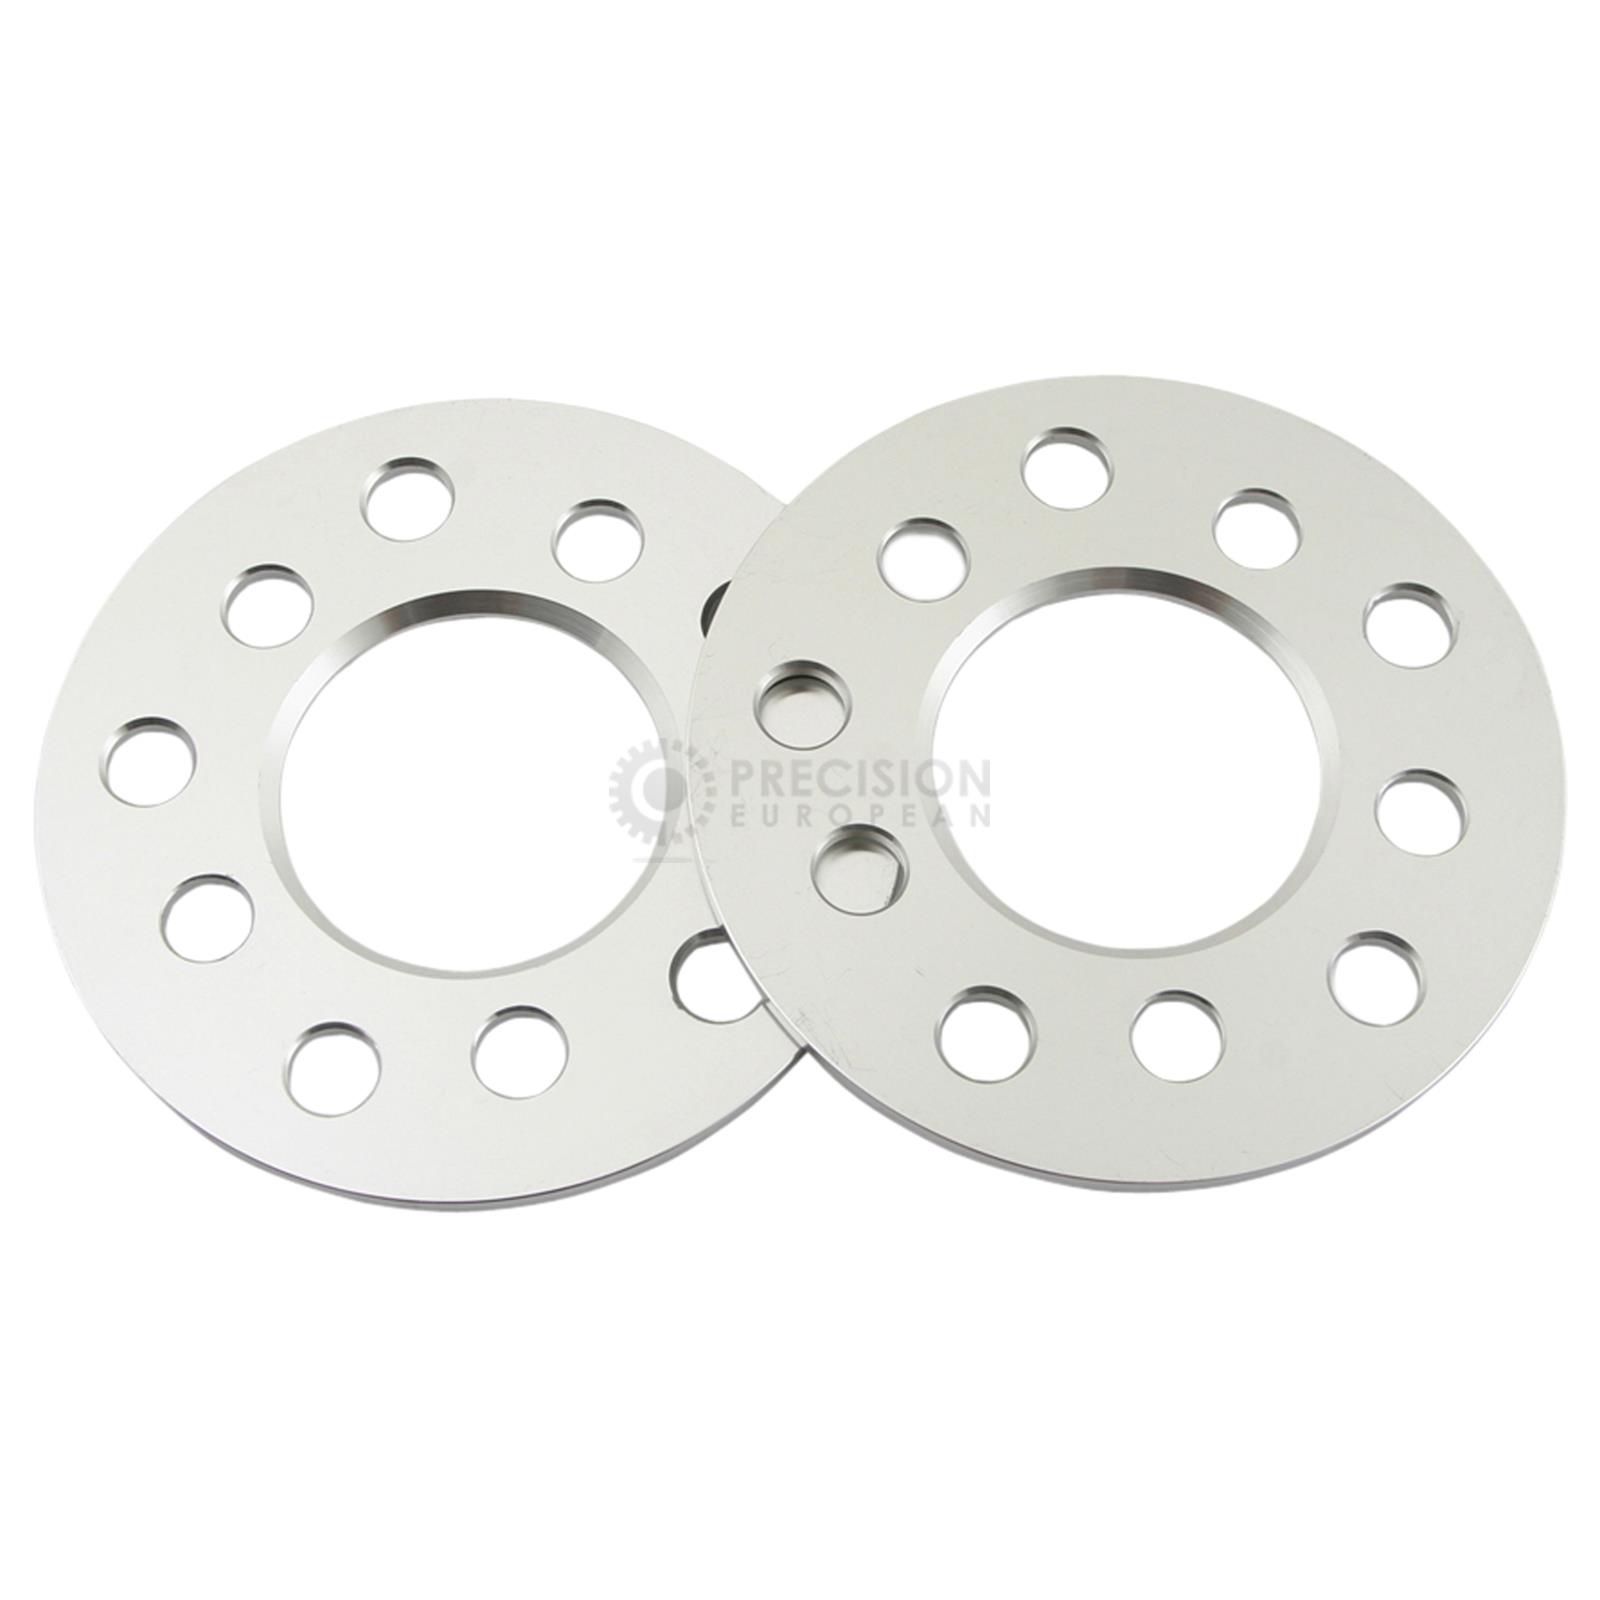 (2) 5mm Hubcentric Wheel Spacers (5x130, 71.6mm Bore)   for most Porsche Vehicles